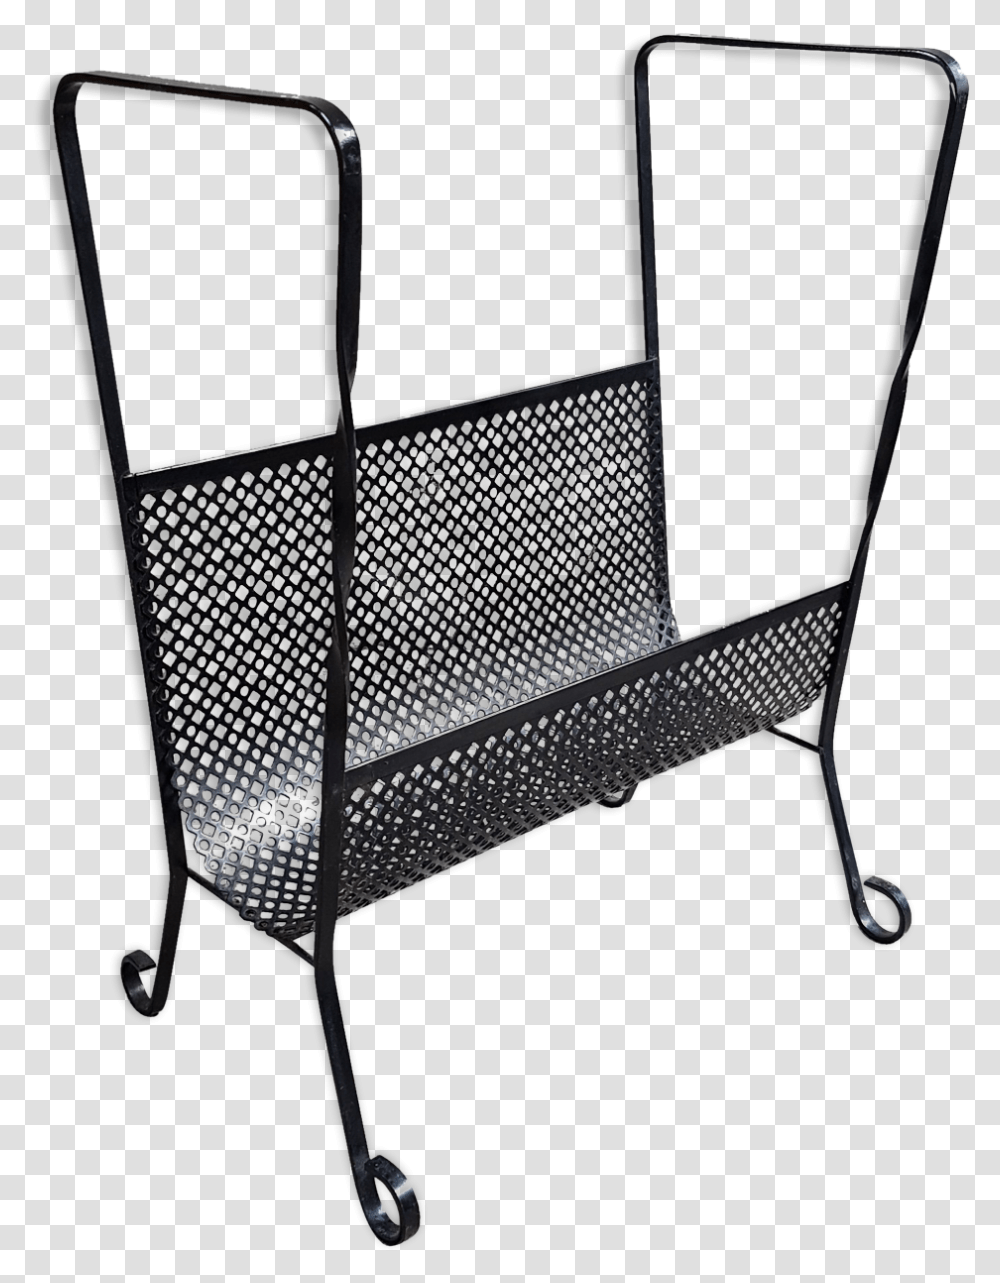 Black 50s Perforated Sheet Metal Magazine Rack Chair, Furniture, Toy, Swing, Outdoors Transparent Png